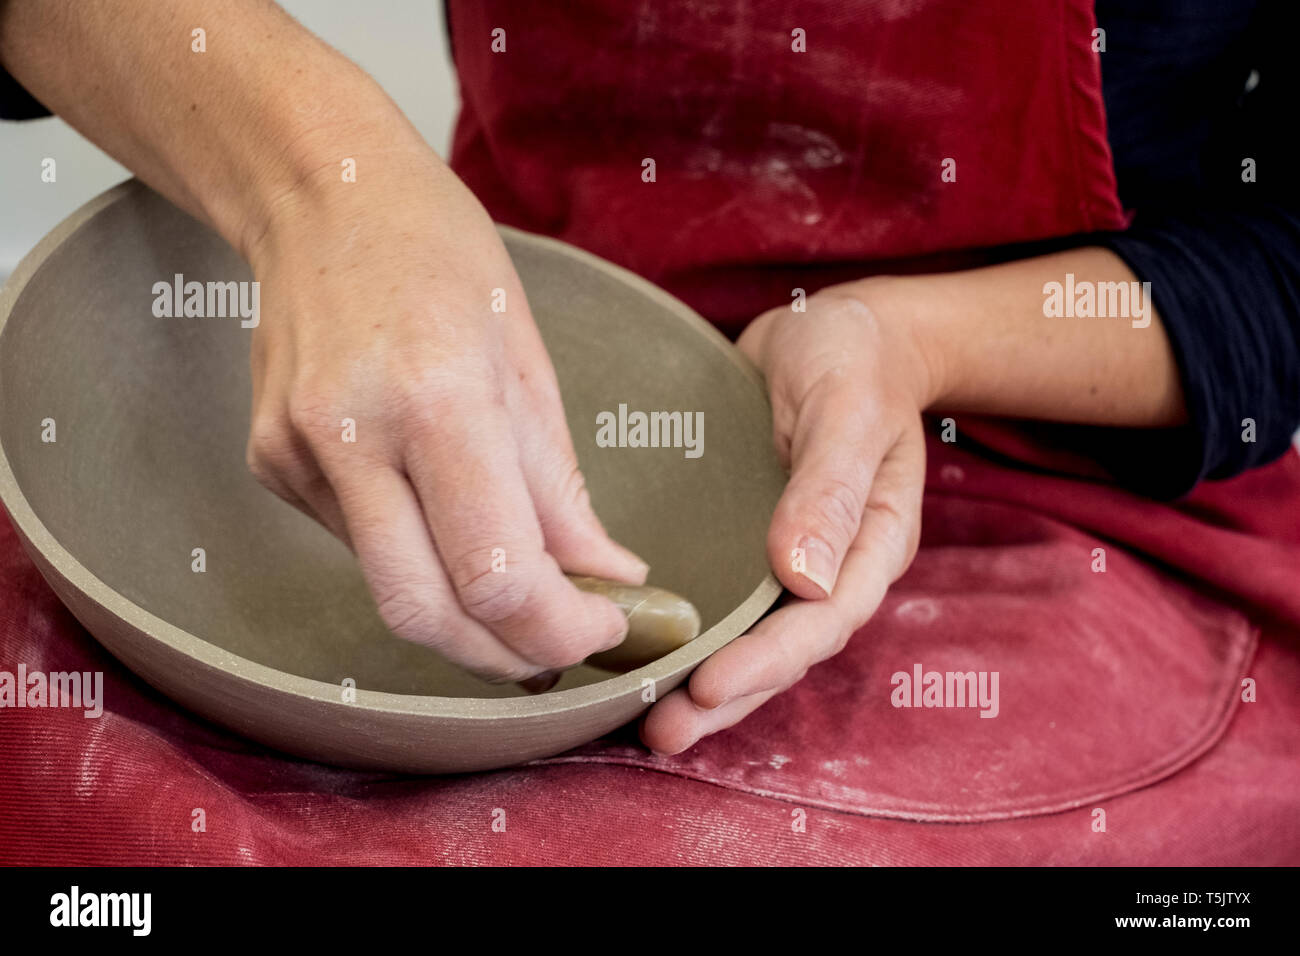 Close up of ceramic artist wearing red apron working on clay bowl. Stock Photo